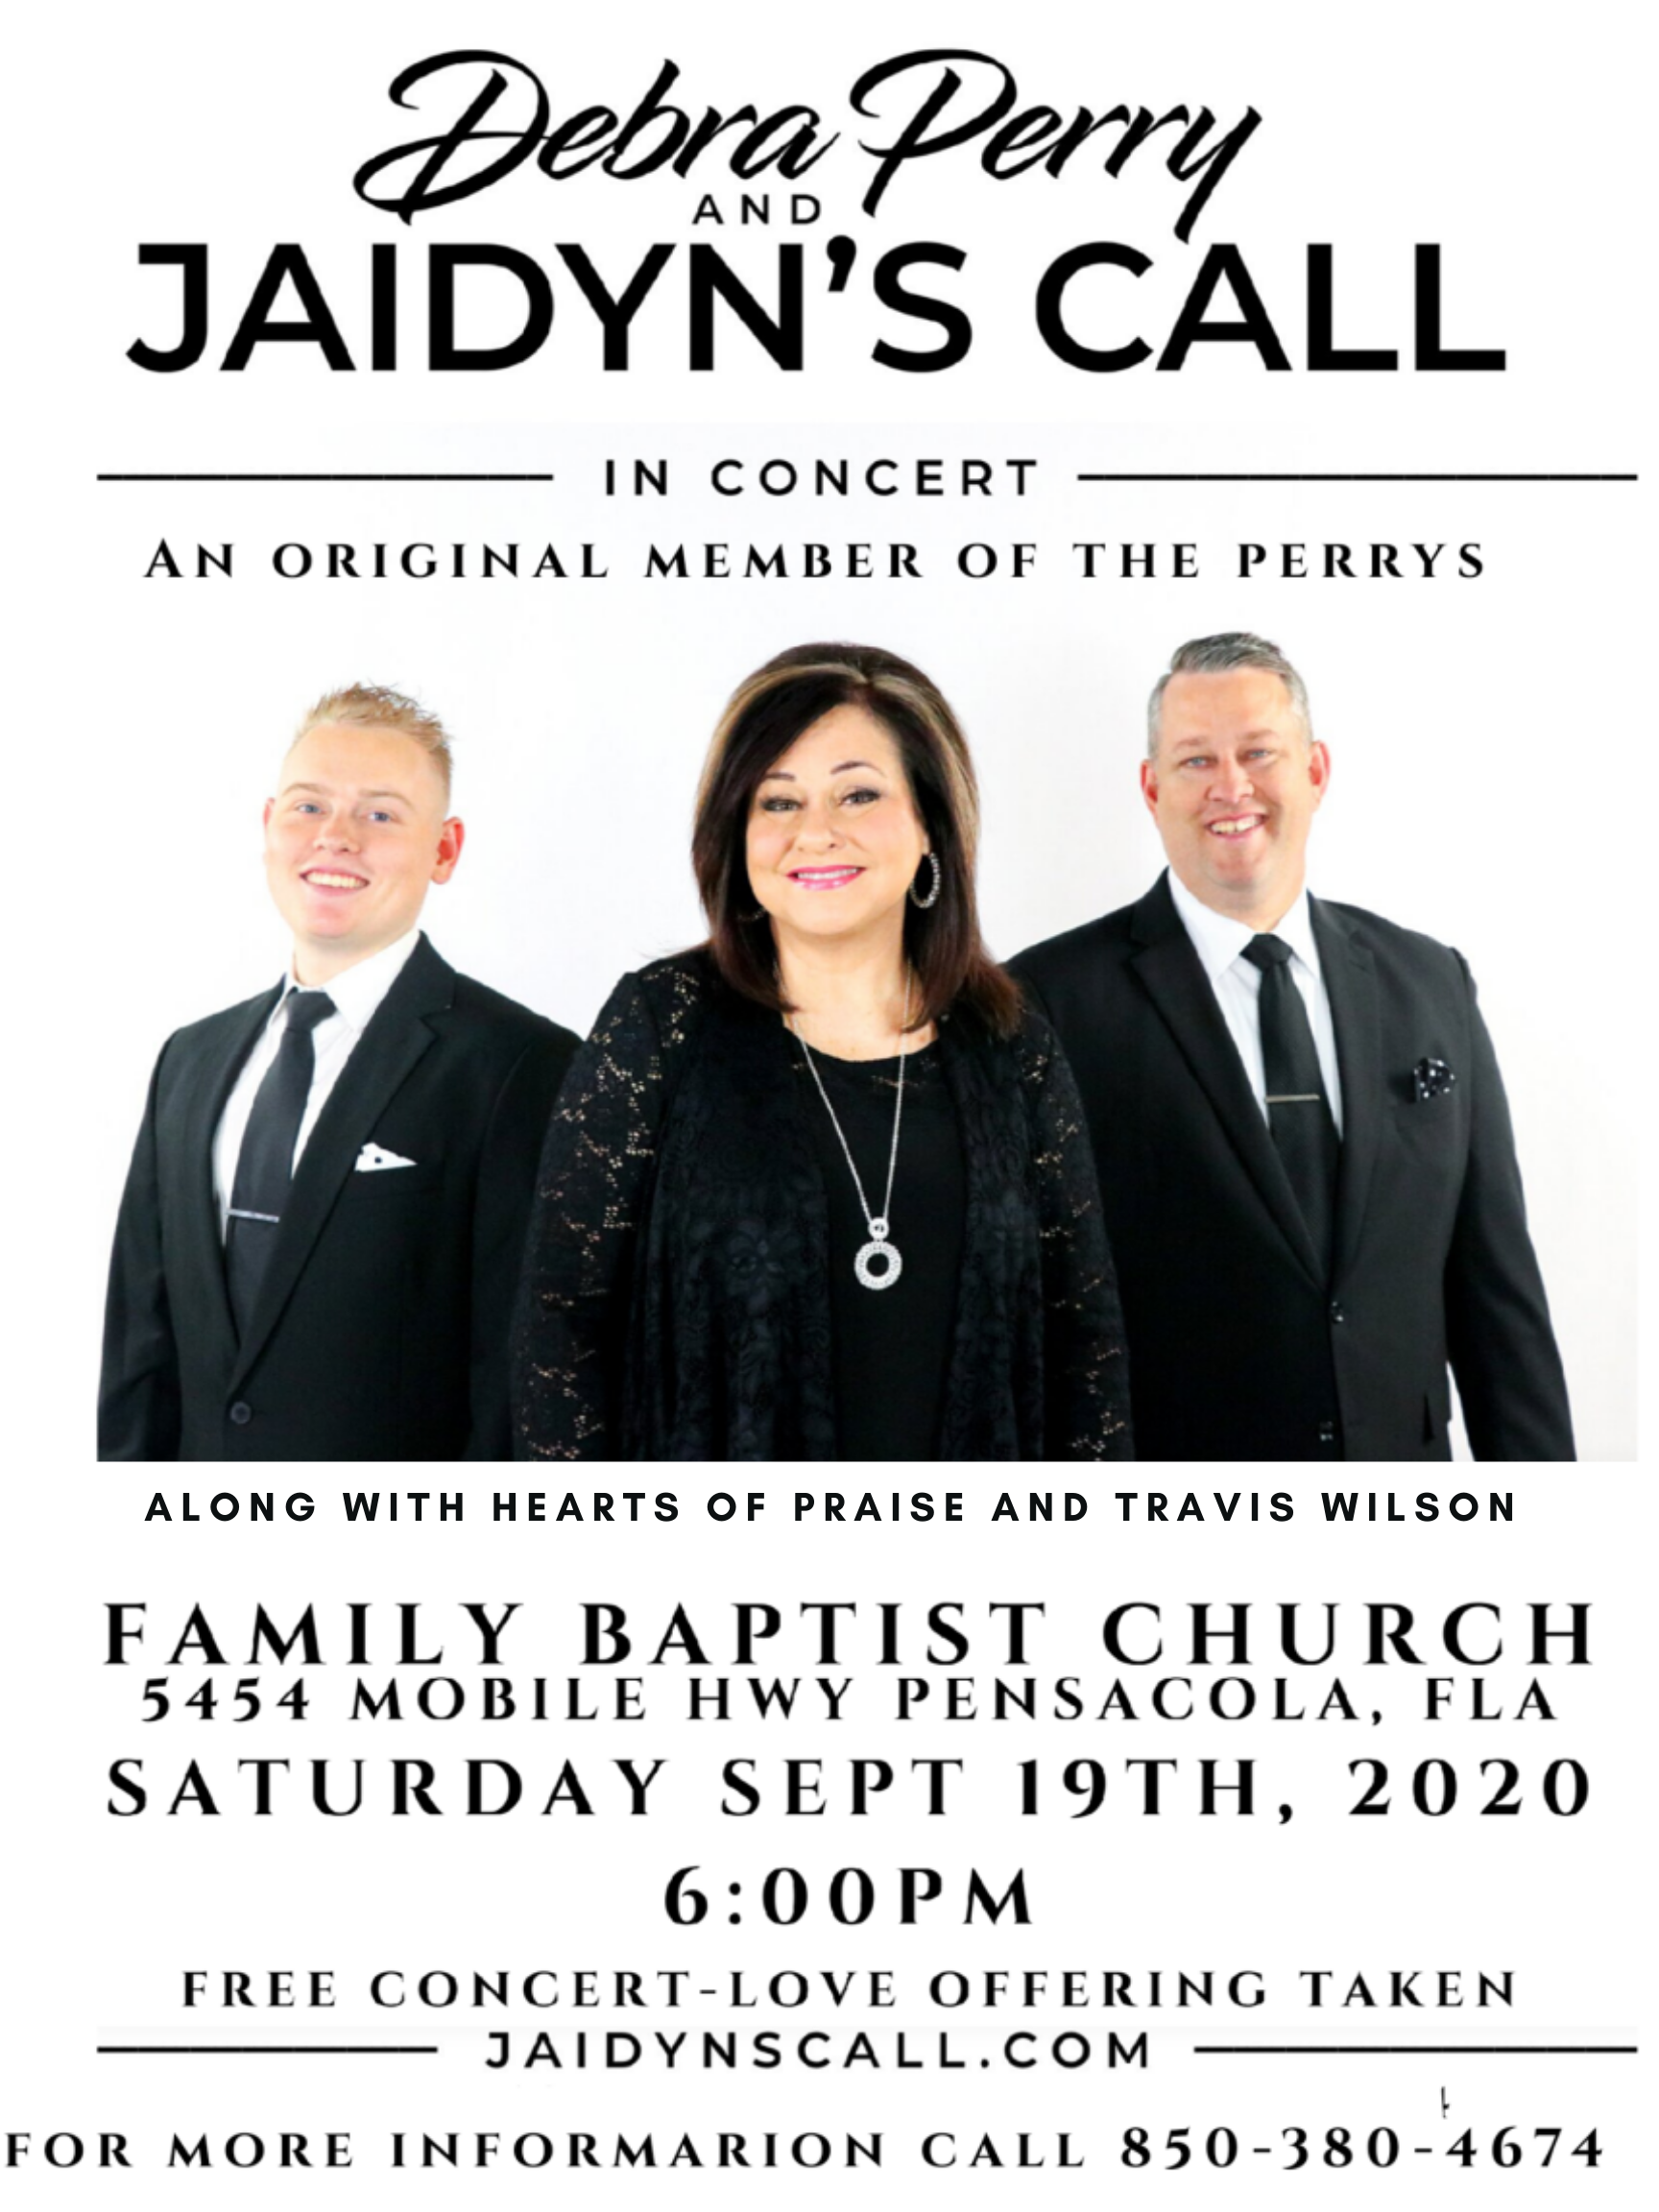 HeartRight Productions Presents Debra Perry and Jaidyn's Call